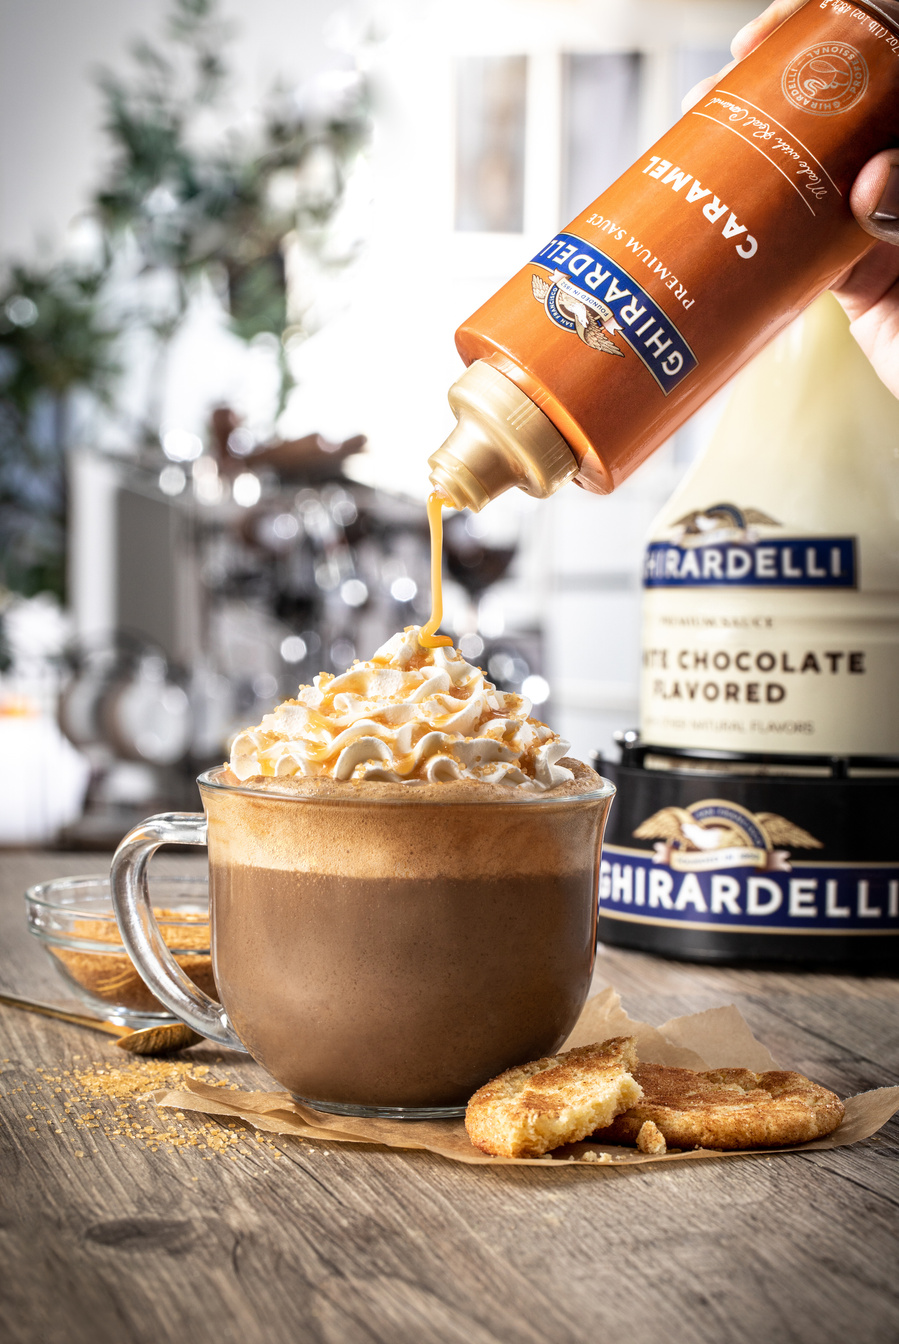 Big glass mug with a latte topped with whipped cream on top and Ghirardelli caramel sauce being added on top. Ghirardelli chocolate creamer package in background.